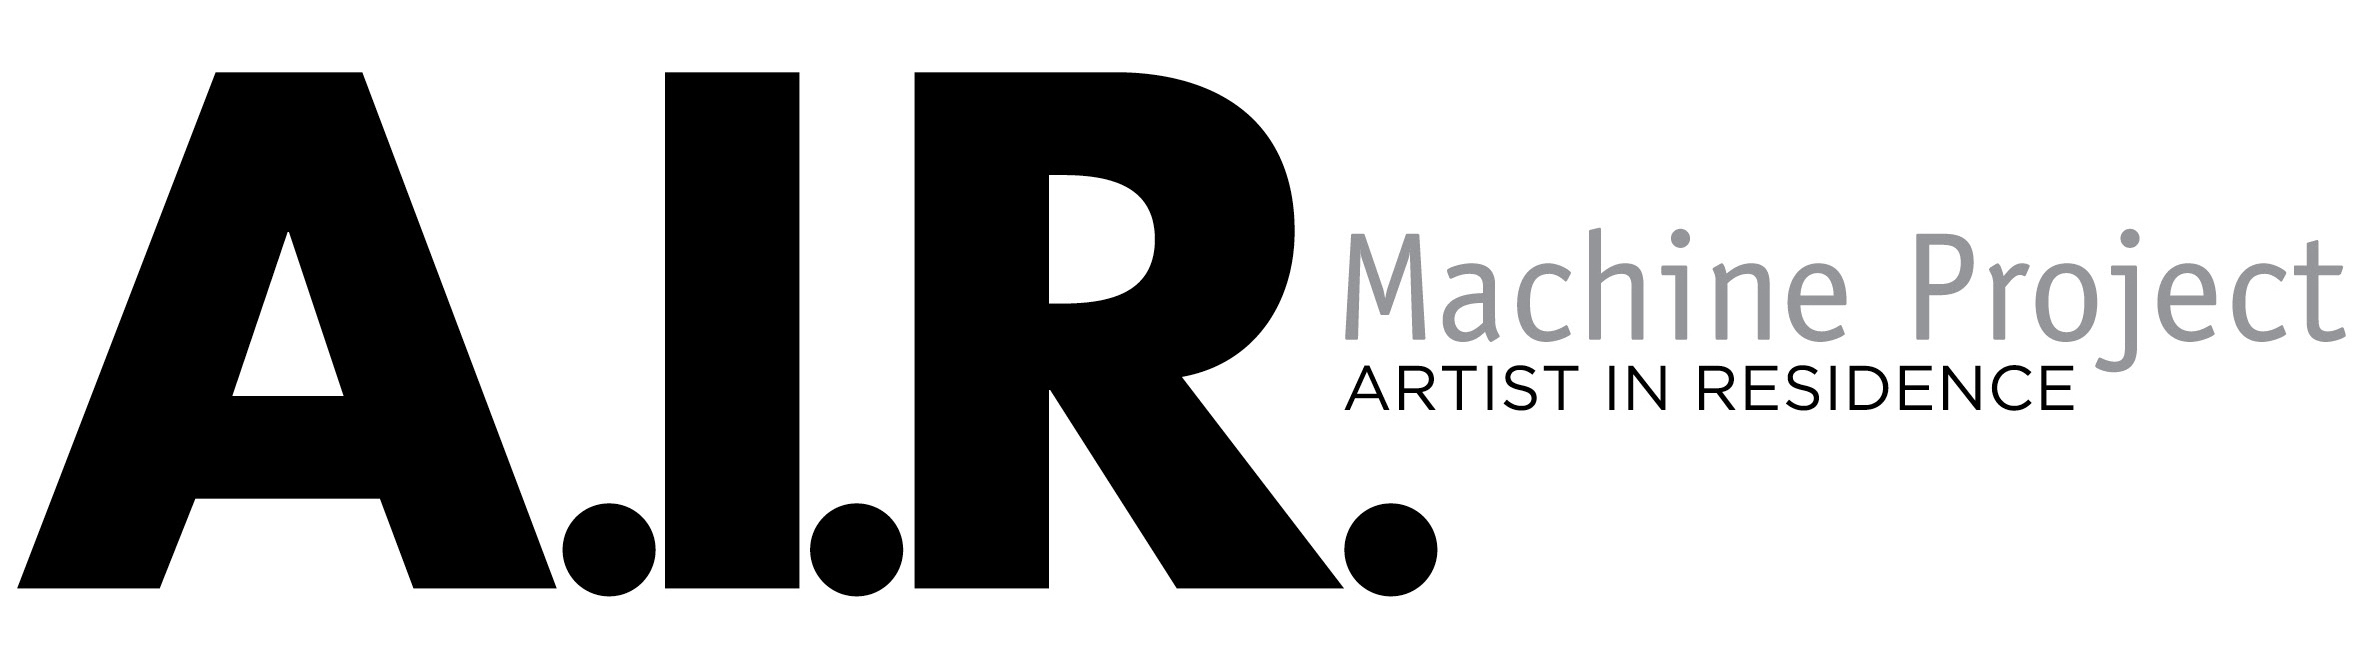 Machine Project Artist In Residence logo